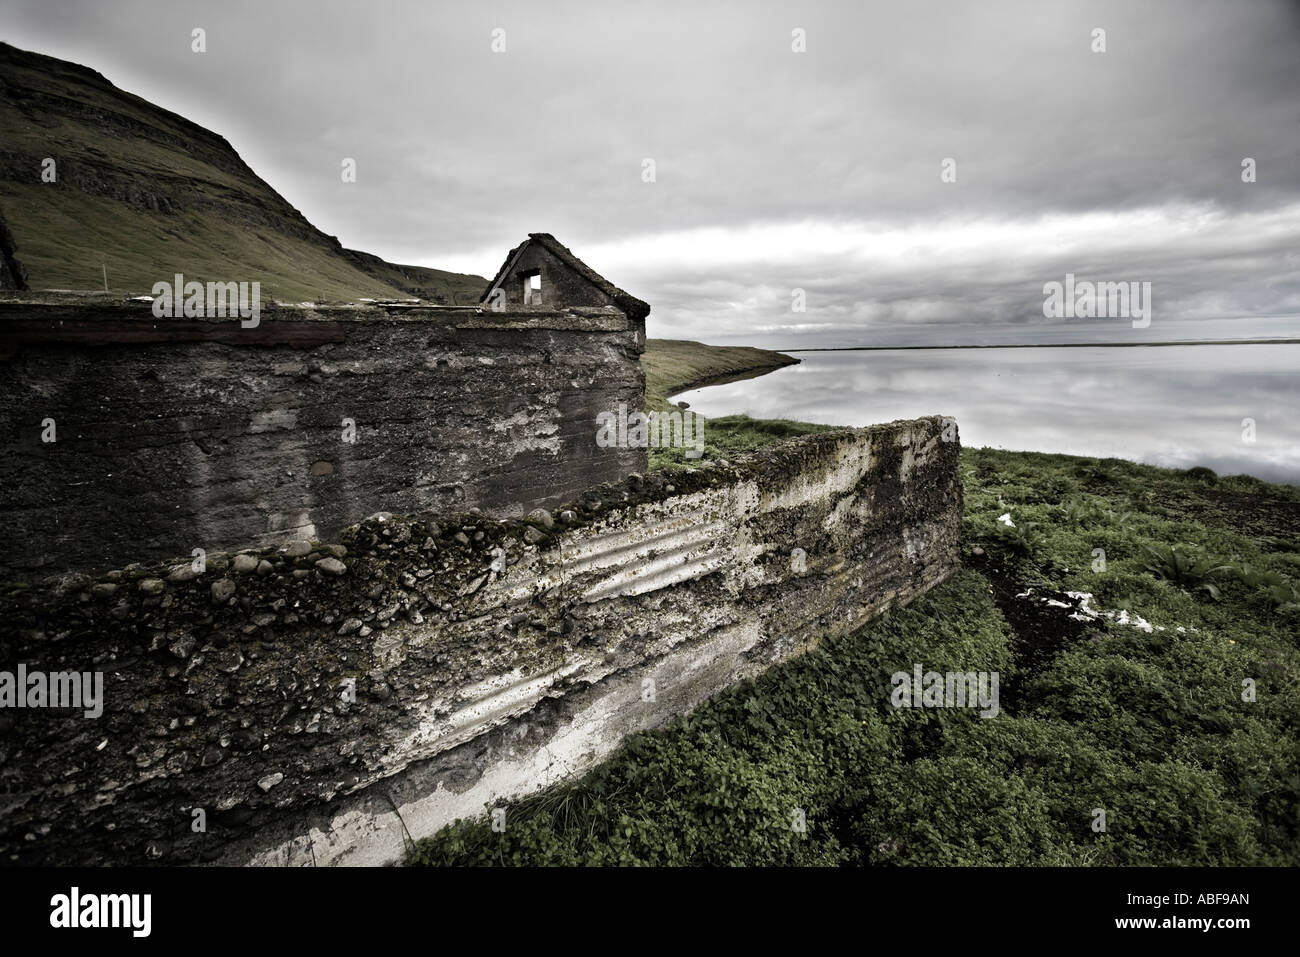 Coastal cliff viewed through the window of an old abondoned house Stock Photo